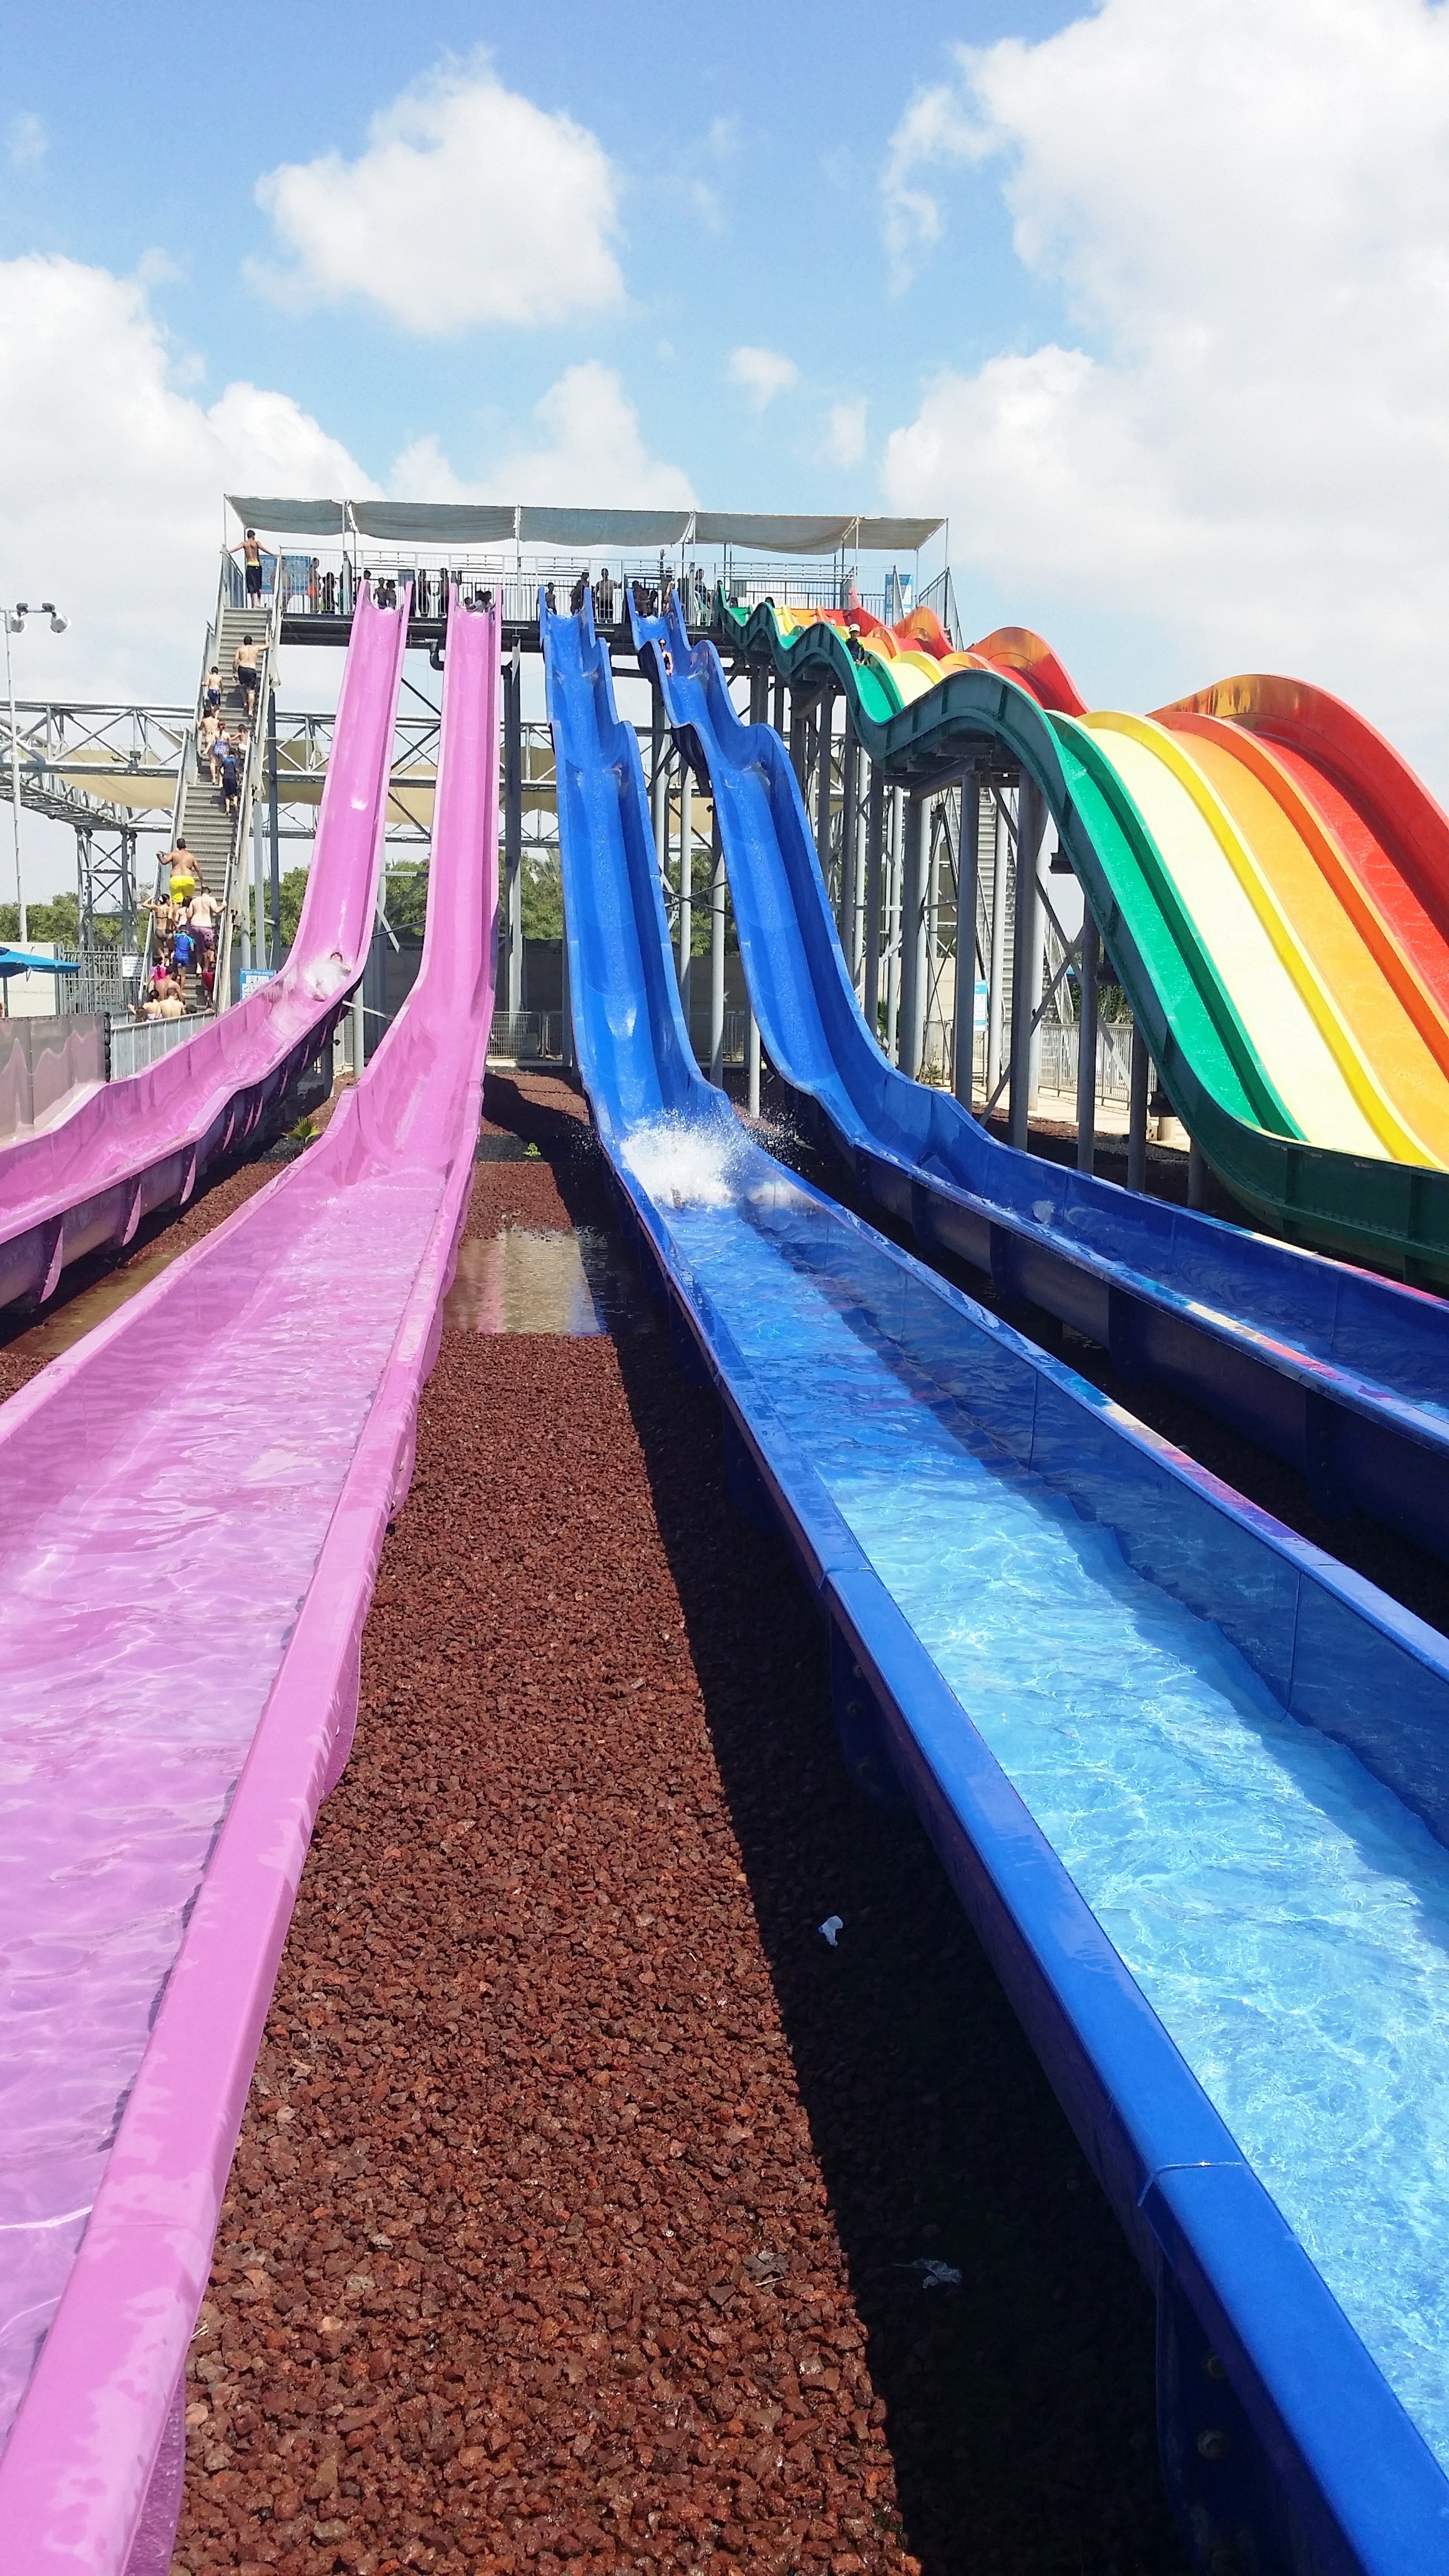 pink blue green yellow and red slides